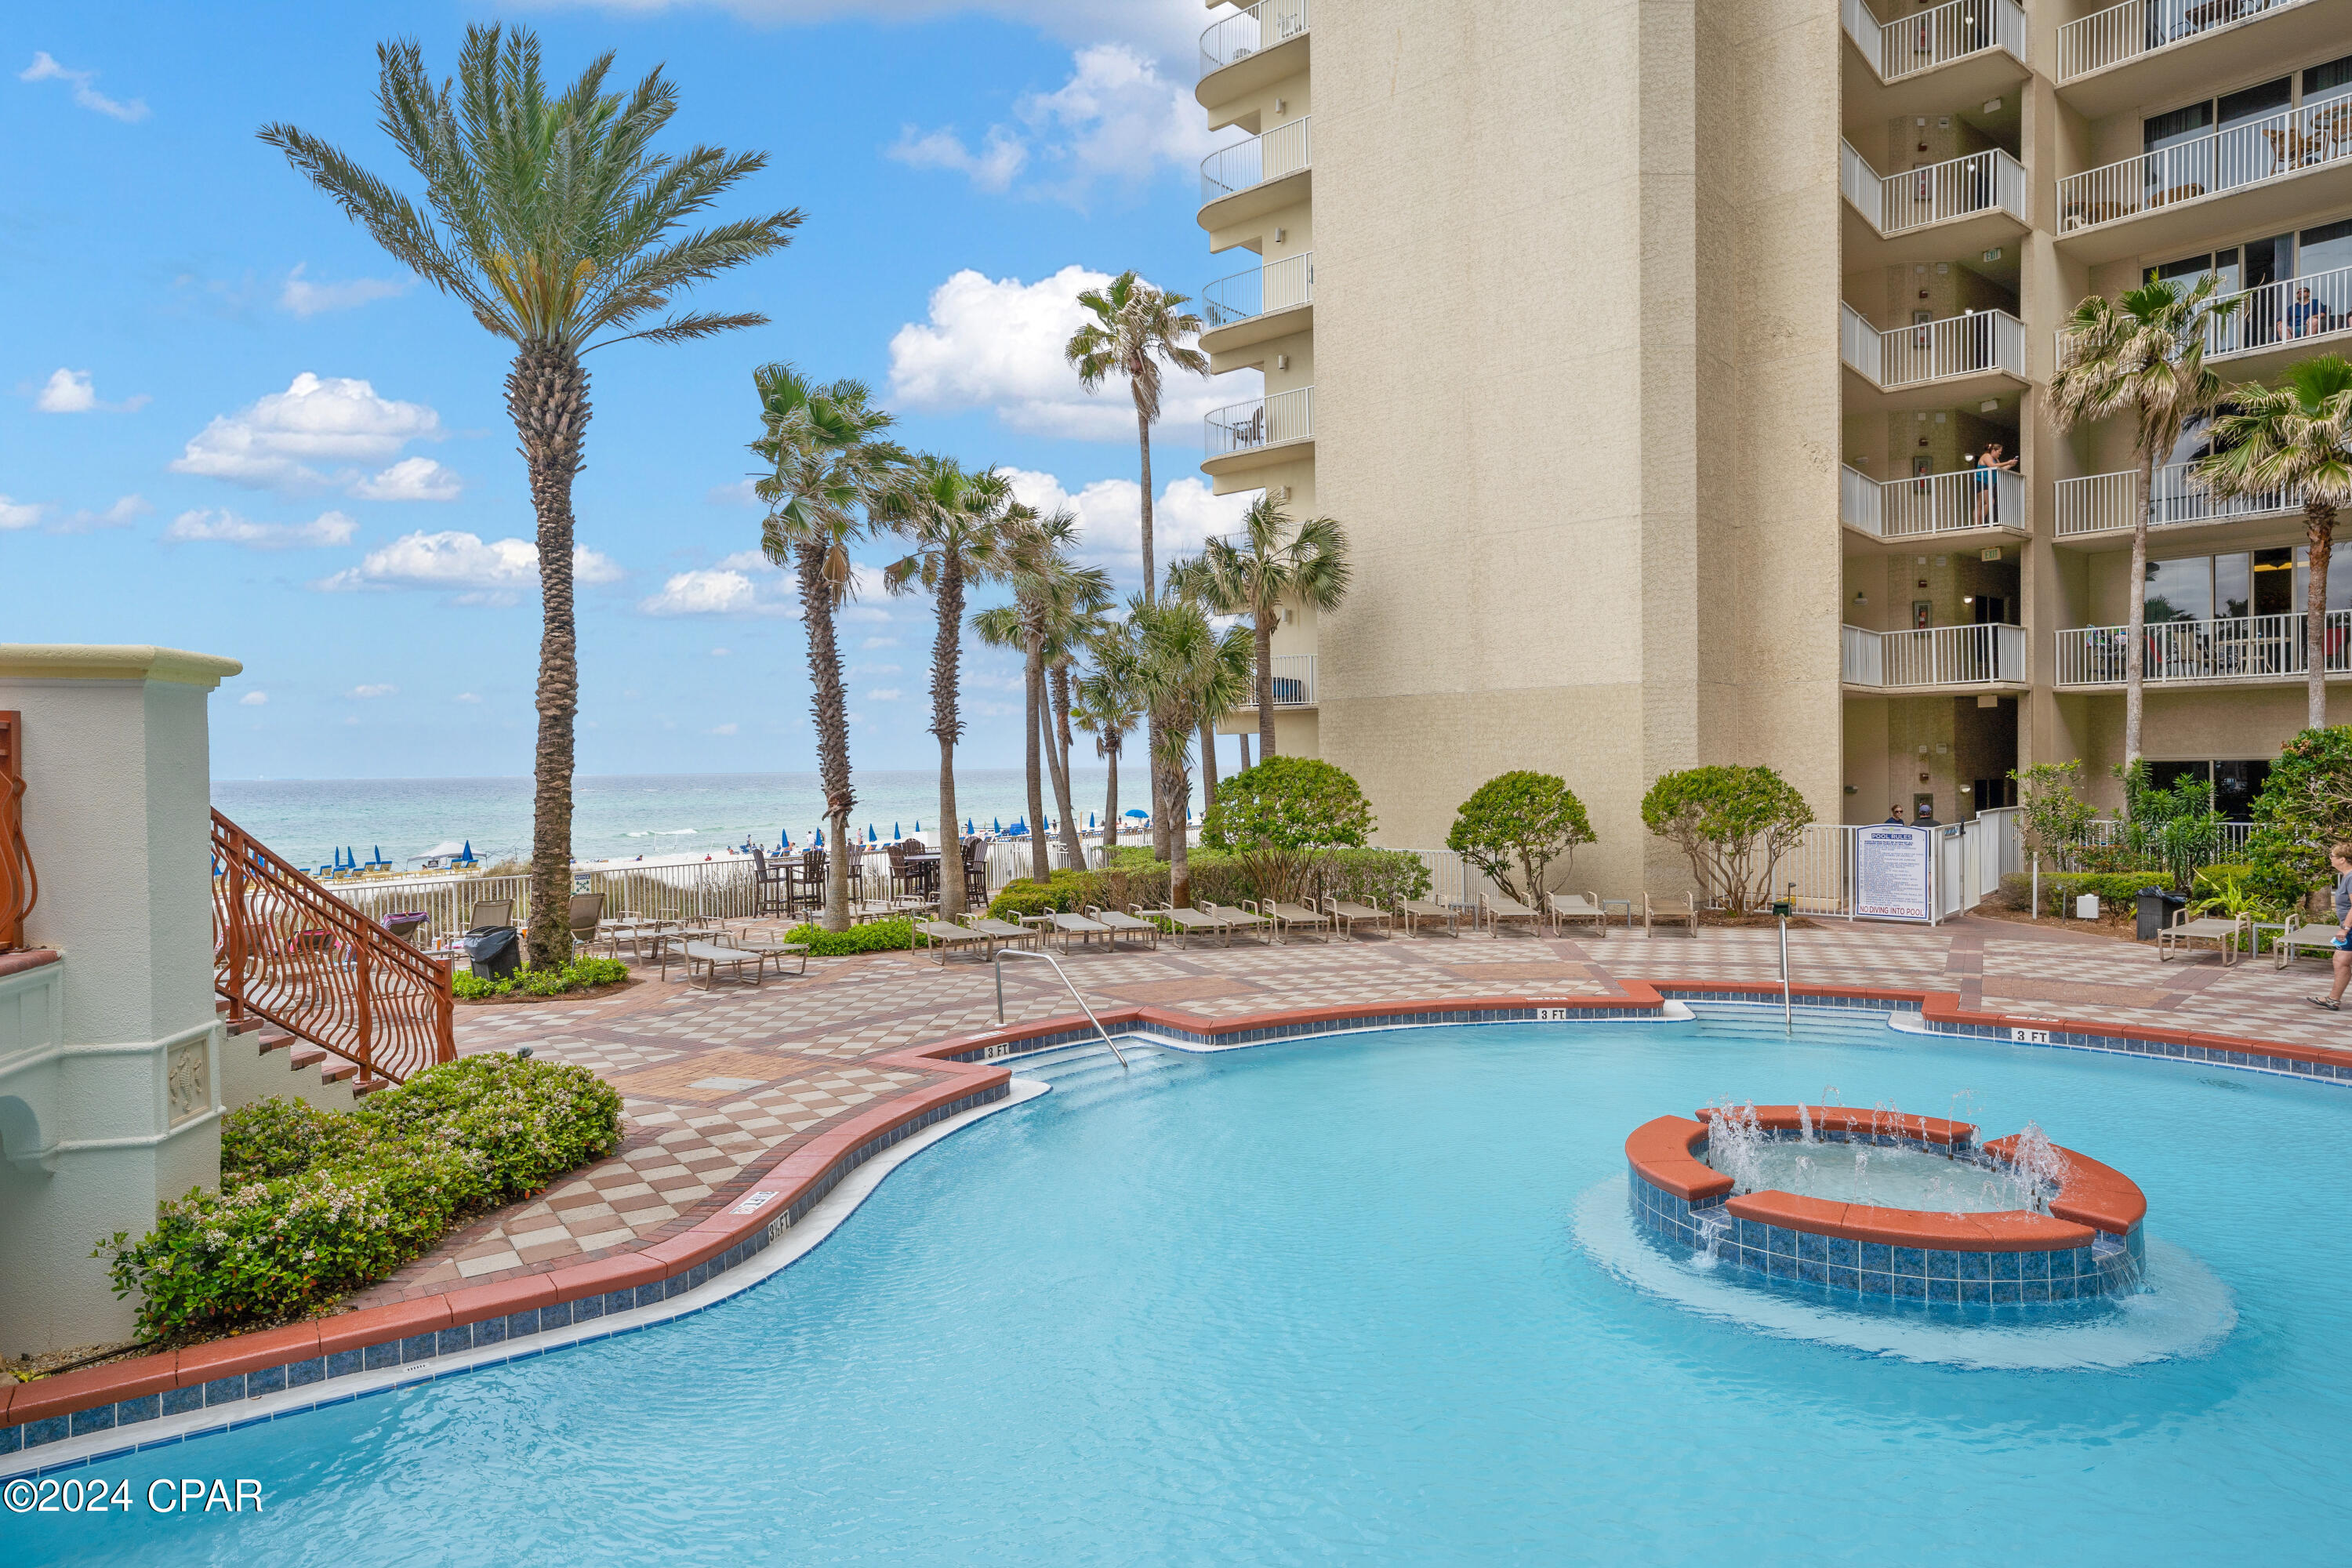 9900 S Thomas Drive Unit 1118, Panama City Beach, Florida, 32408, United States, 2 Bedrooms Bedrooms, ,3 BathroomsBathrooms,Residential,For Sale,9900 S Thomas Drive Unit 1118,1486227